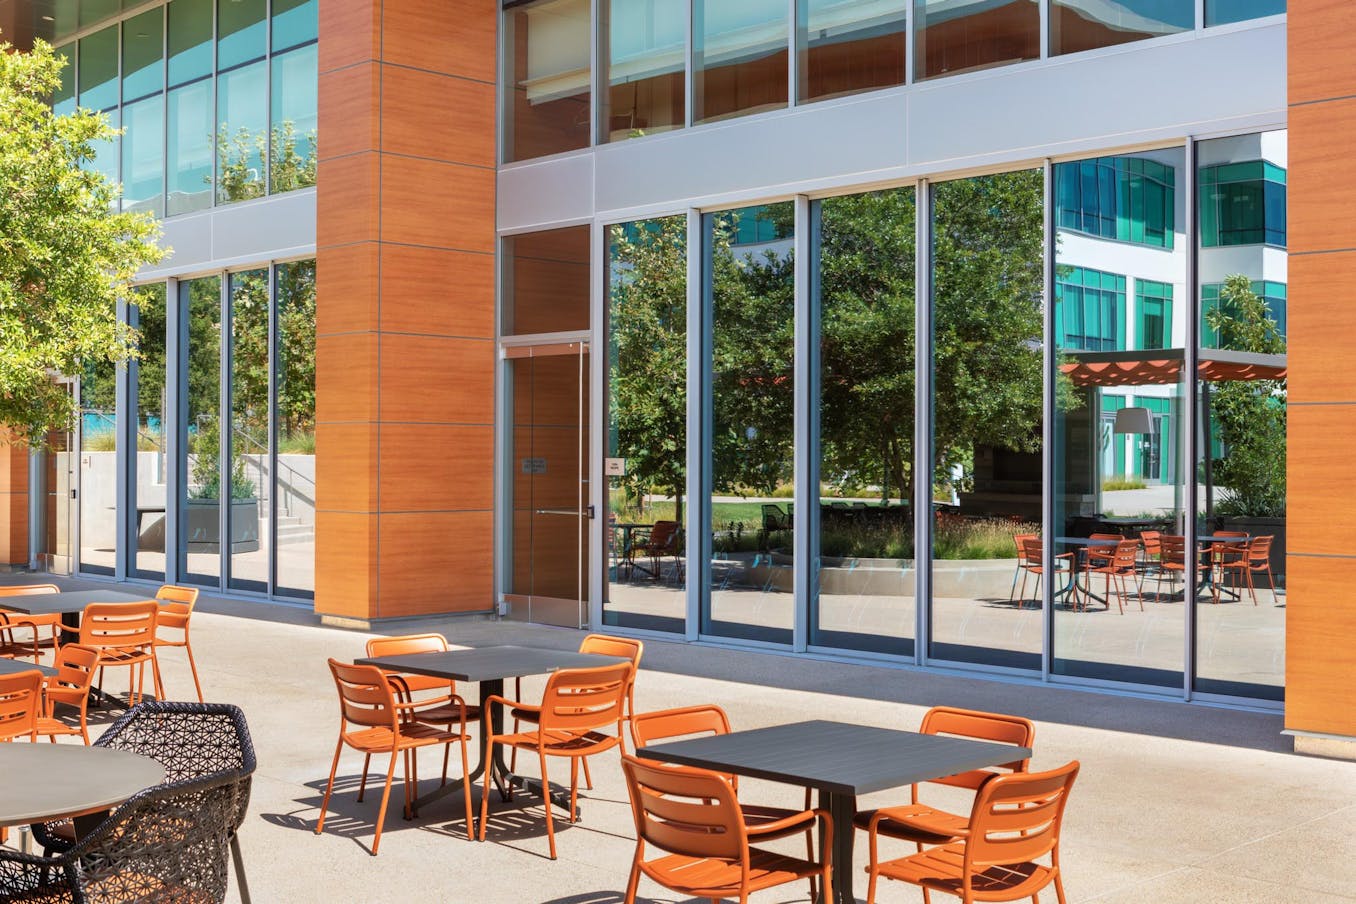 Outdoor seating area with closed sliding doors at a modern office building on a sunny day